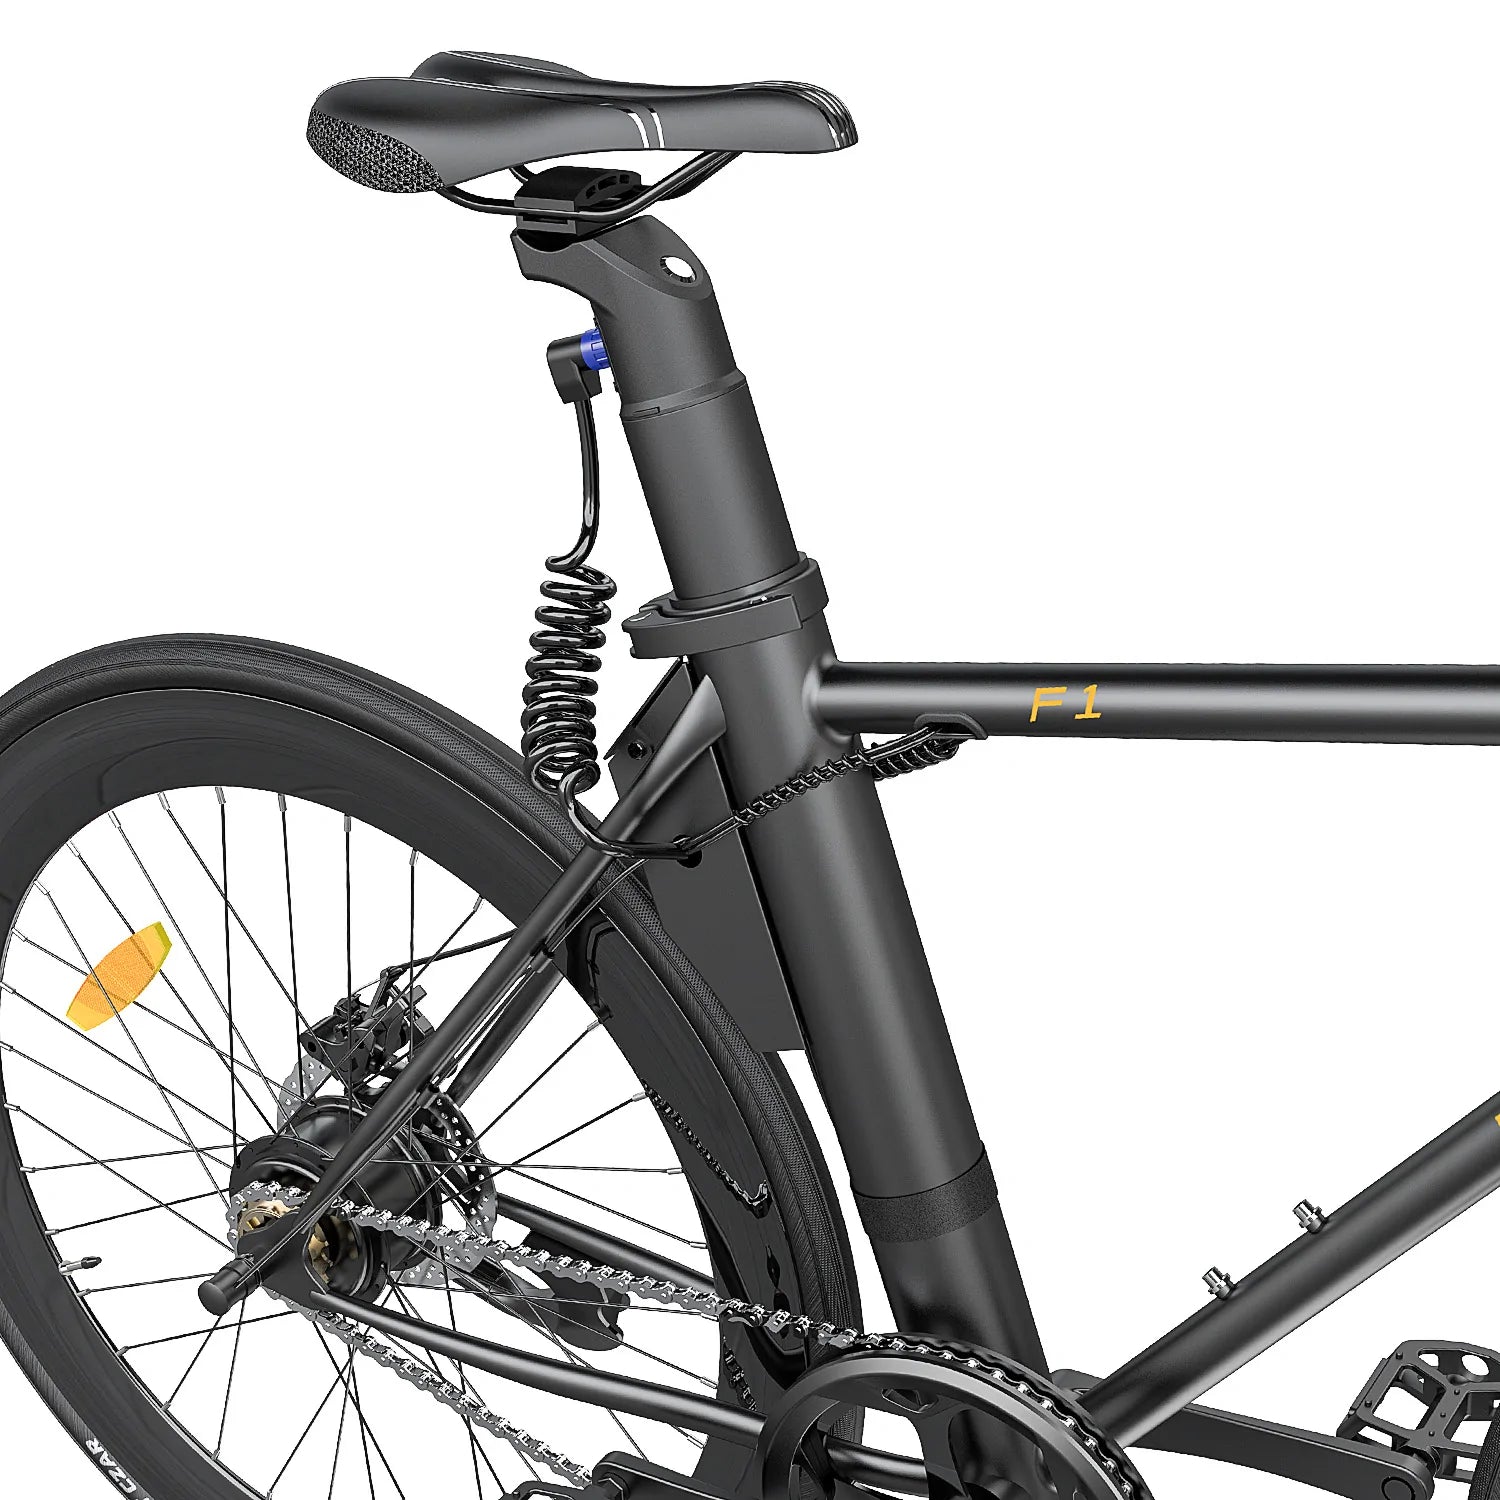 FAFREES F1 Electric Bike - Pogo Cycles available in cycle to work